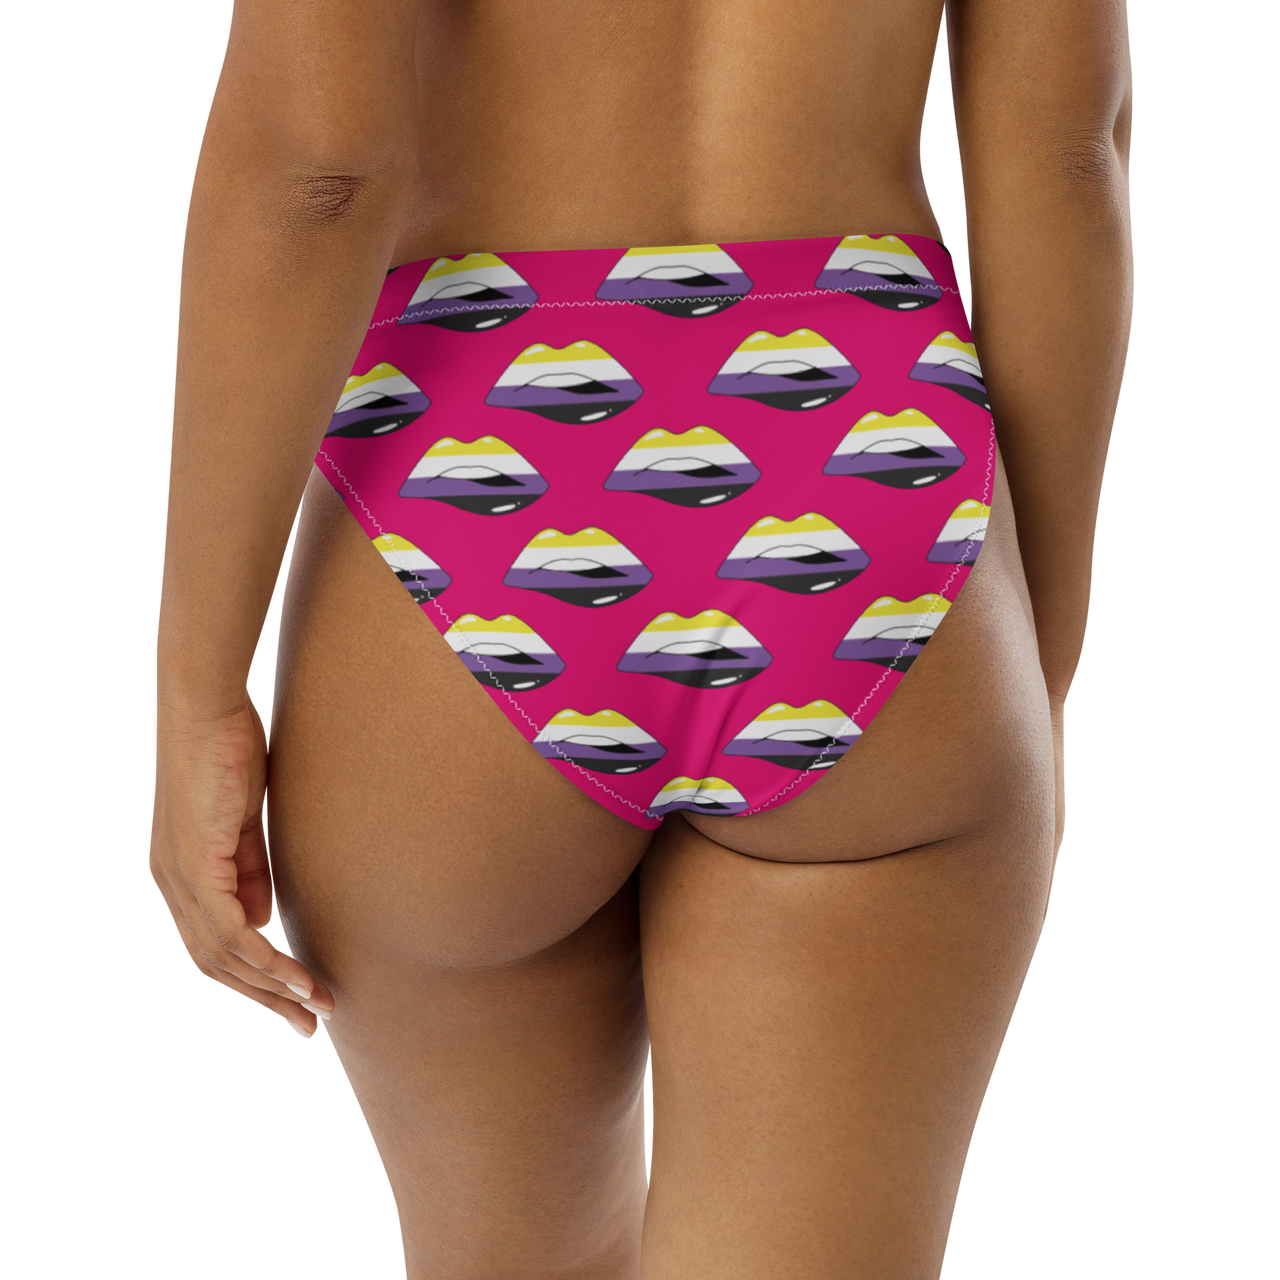 Non-Binary Flag LGBTQ Kisses Underwear for They/Them Him/Her - Pink SHAVA